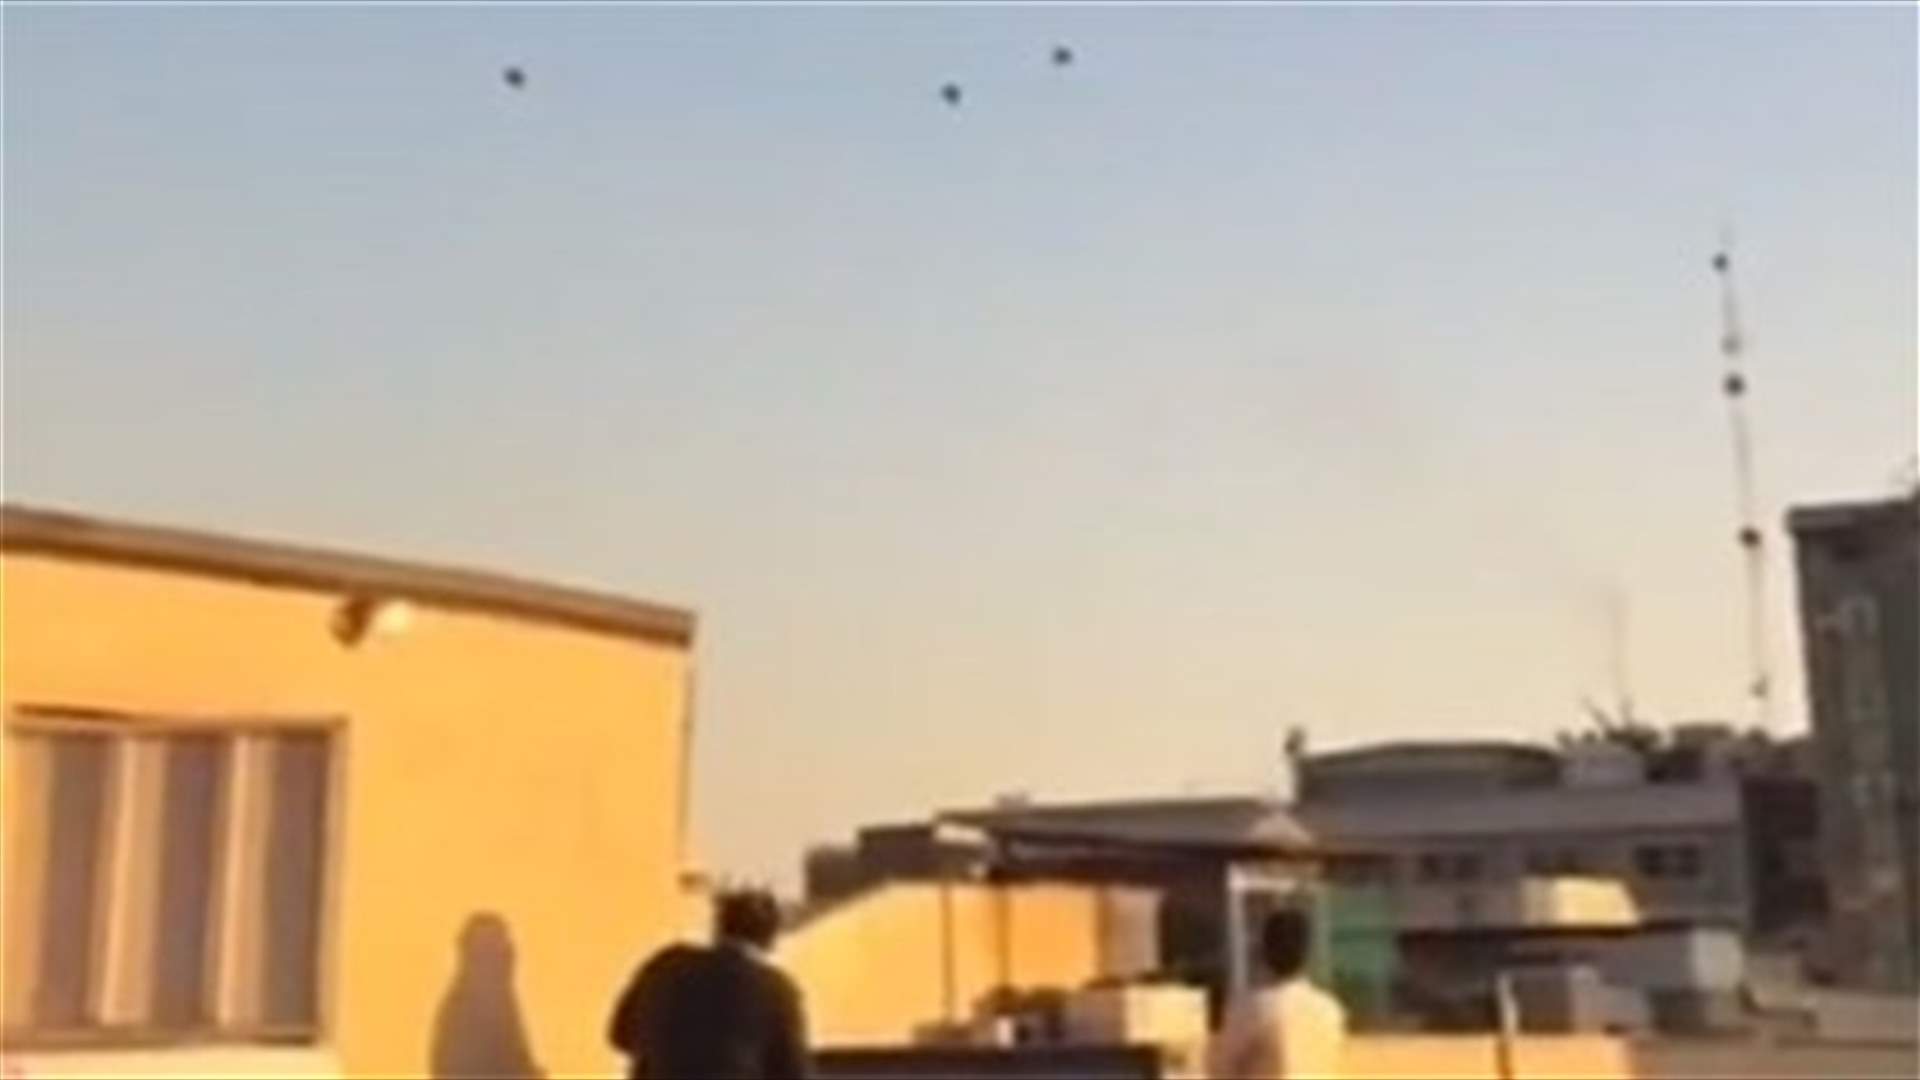 [VIDEO] Iran shoots at a drone in central Tehran - military commander